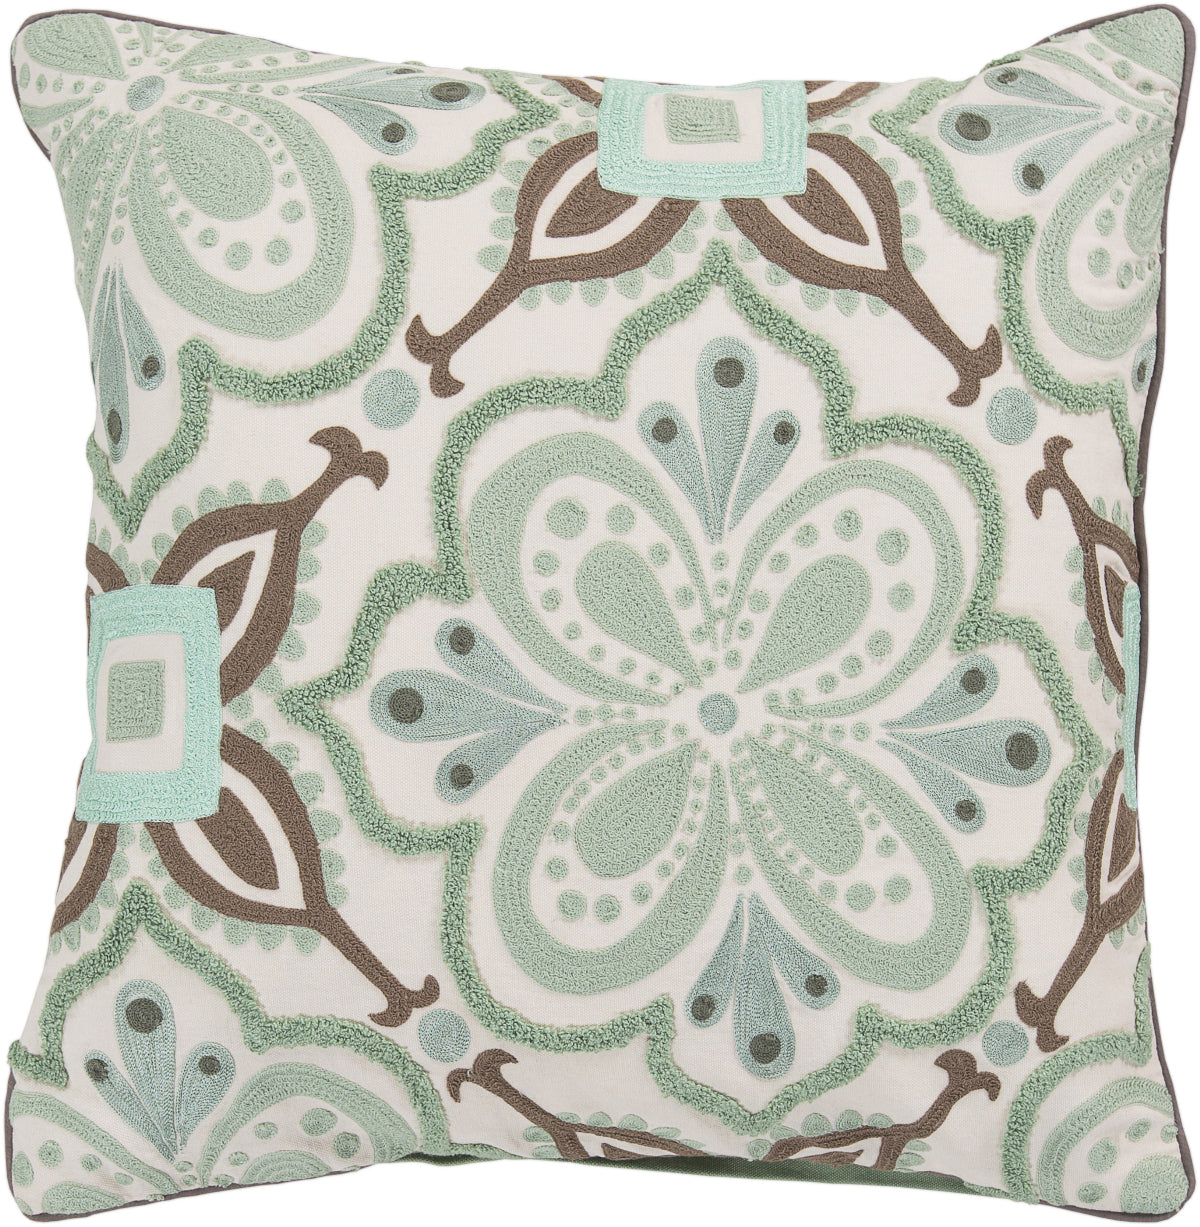 Surya Alhambra Embroidered Modern in Morocco KS-012 Pillow by Kate Spain main image